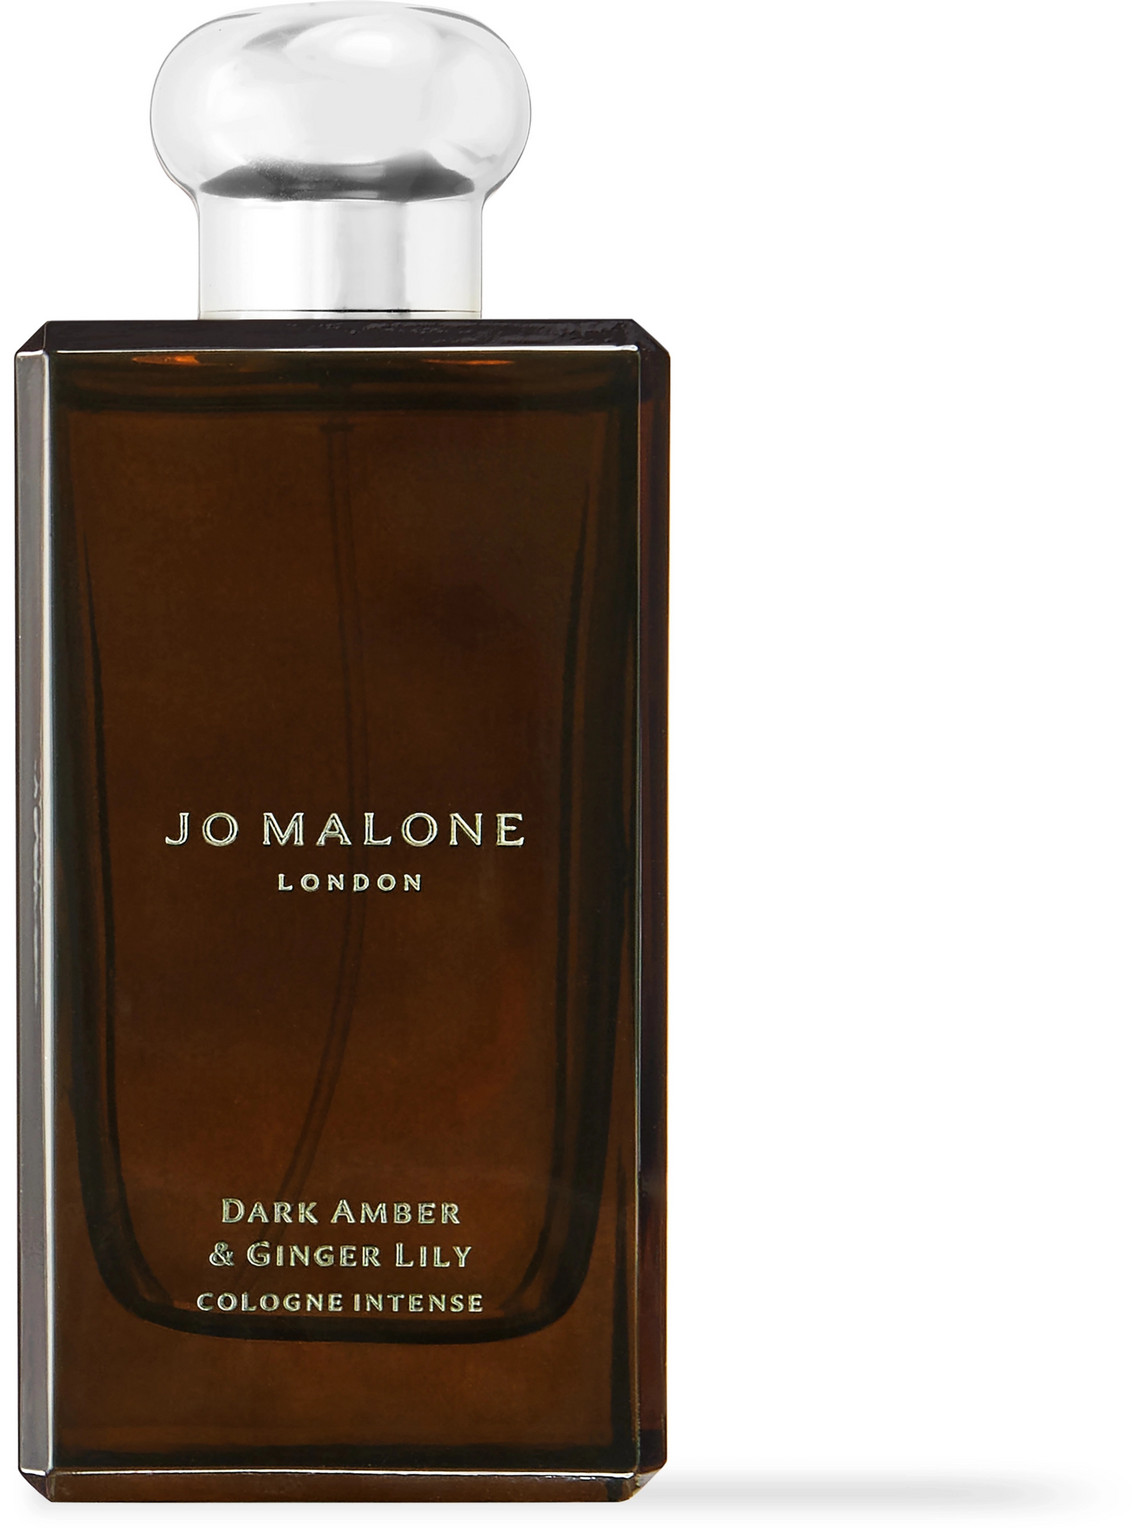 Jo Malone London Dark Amber & Ginger Lily Cologne Intense, 100ml In Colorless